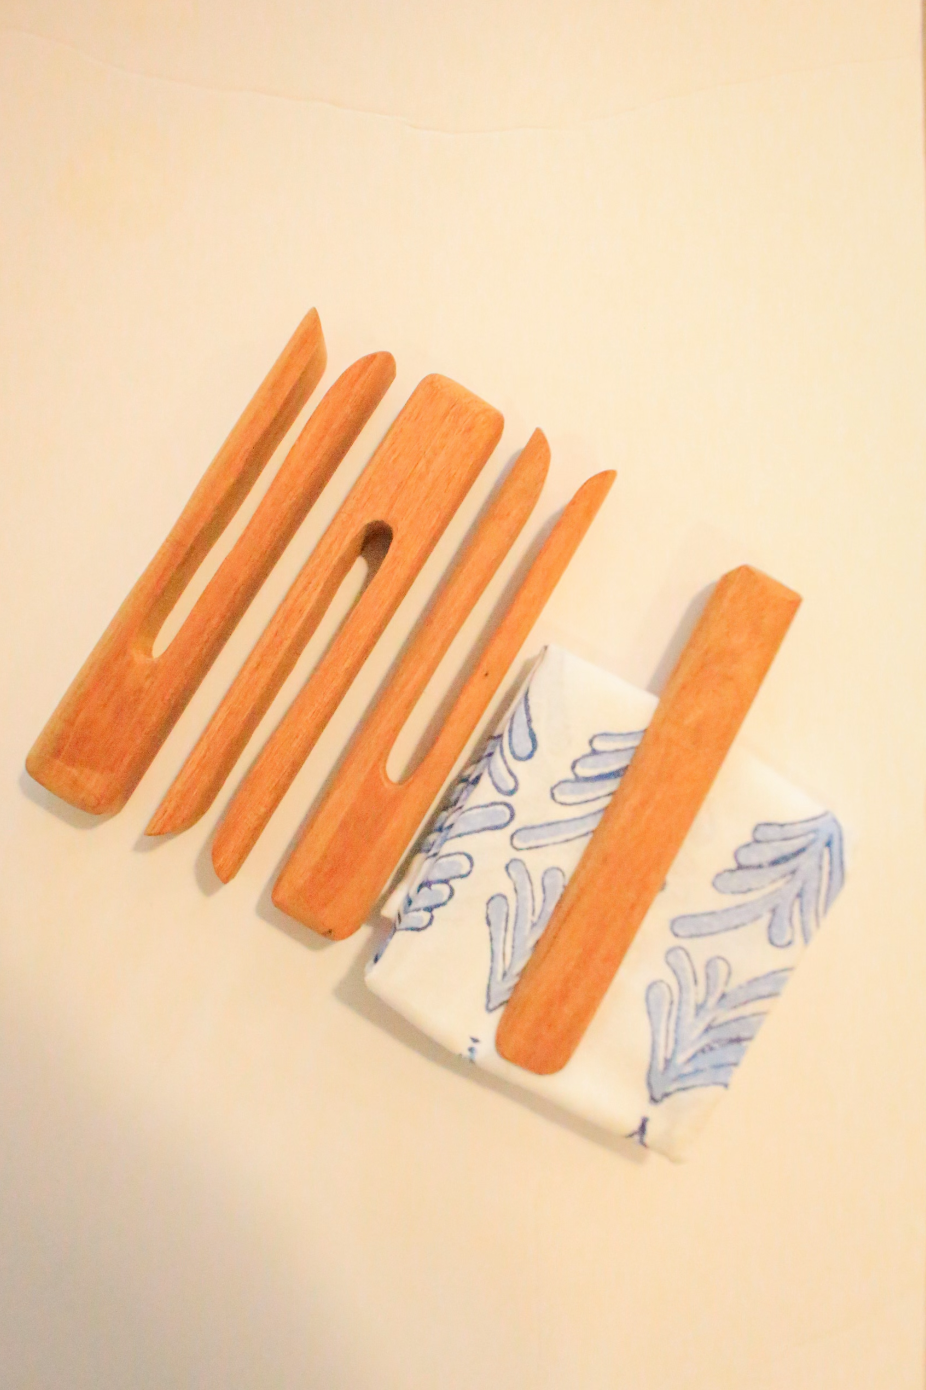 Hand-Carved Wooden Napkin Holders (Set of 4) - Clothespin